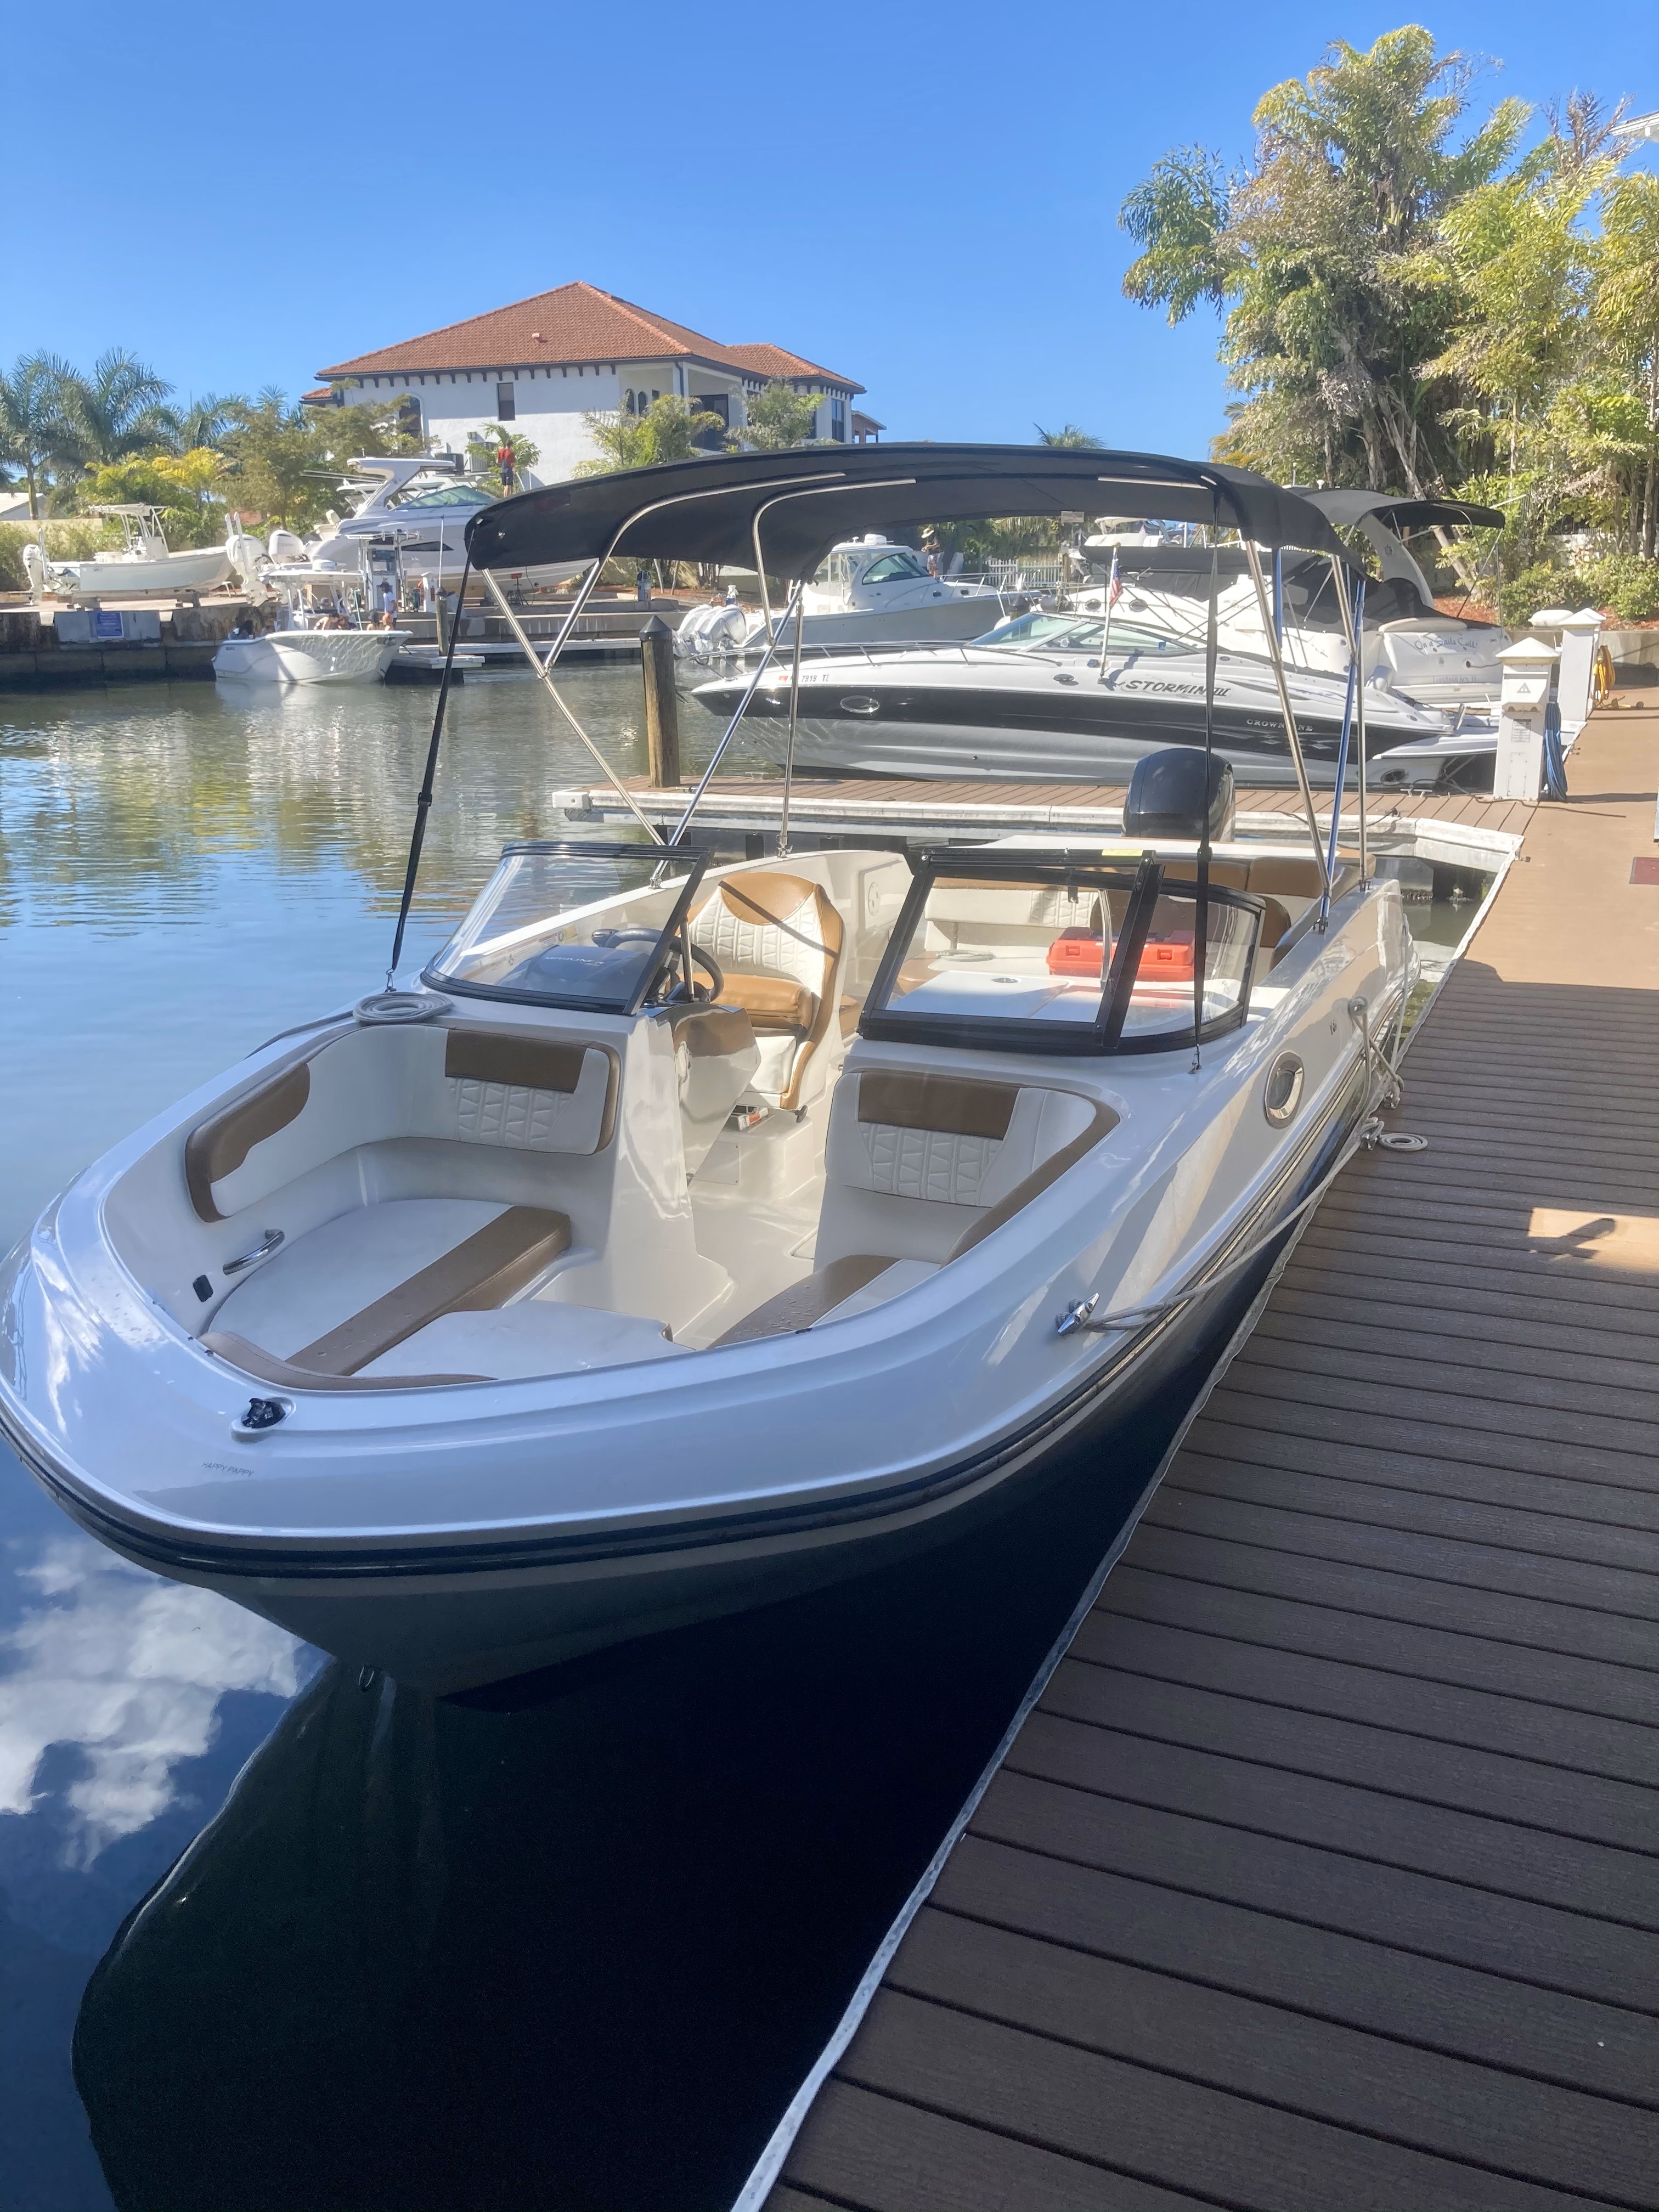 COUPLES THERAPY (Bayliner 22' Deck Boat 150 HP - Cruising)